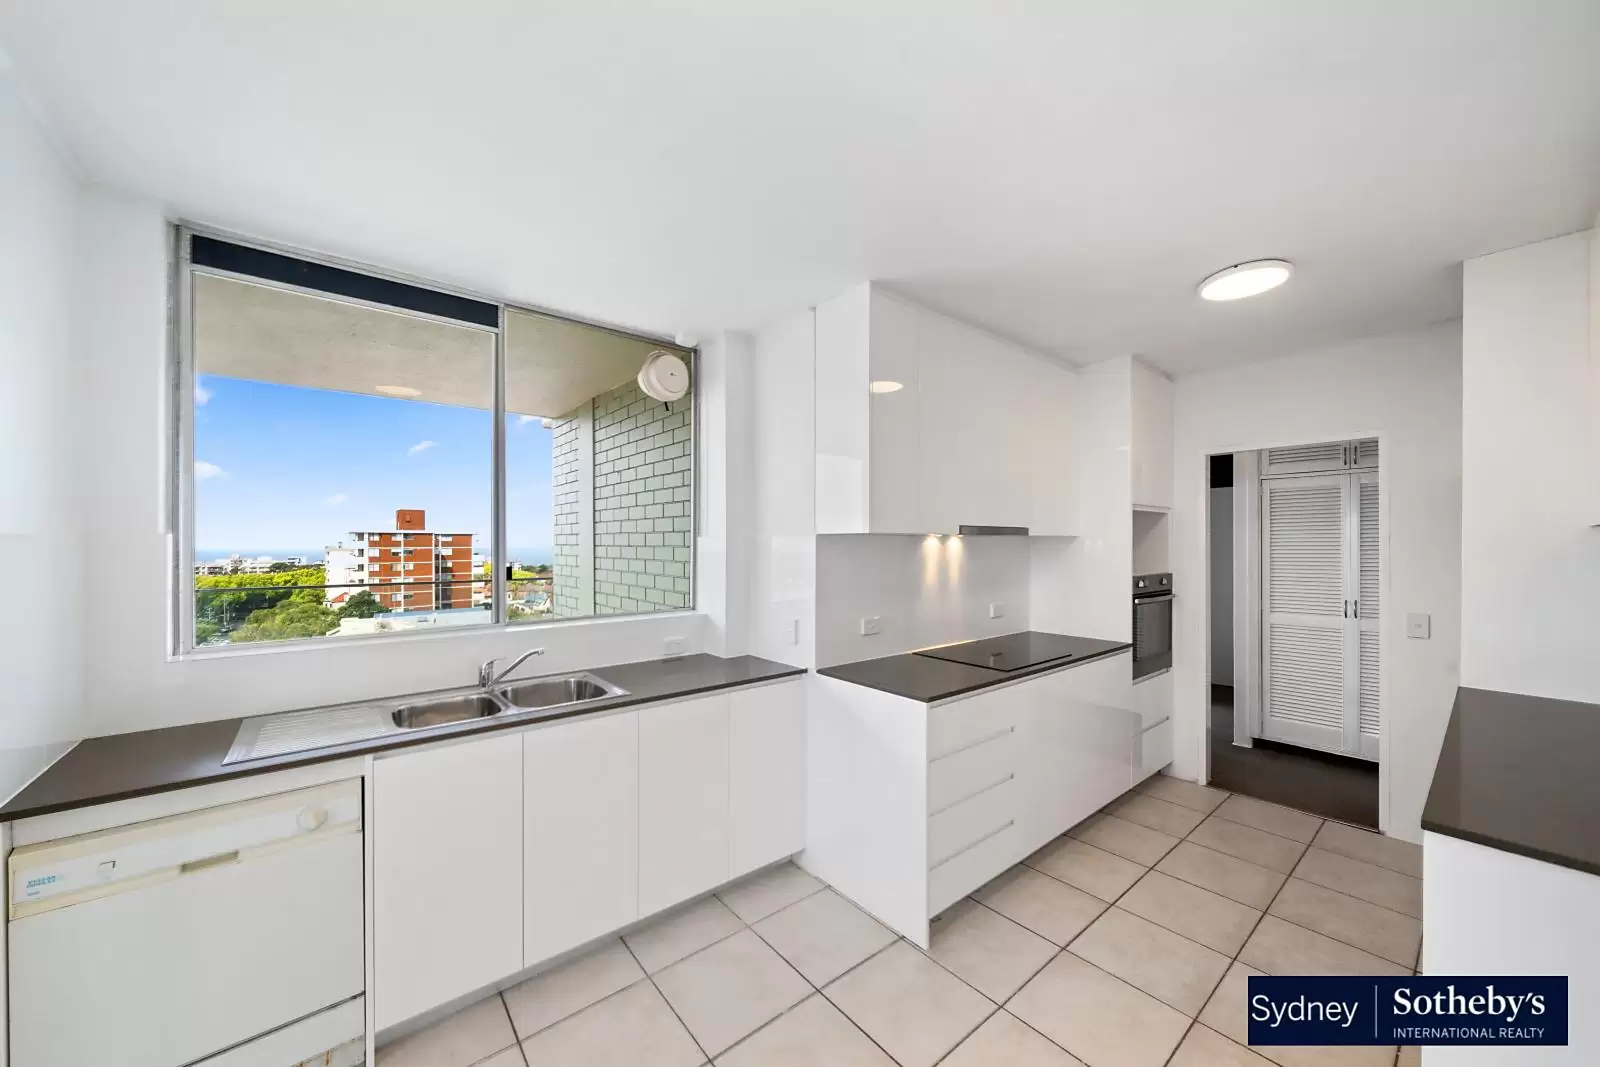 19/17-19 Gowrie Avenue, Bondi Junction Leased by Sydney Sotheby's International Realty - image 3